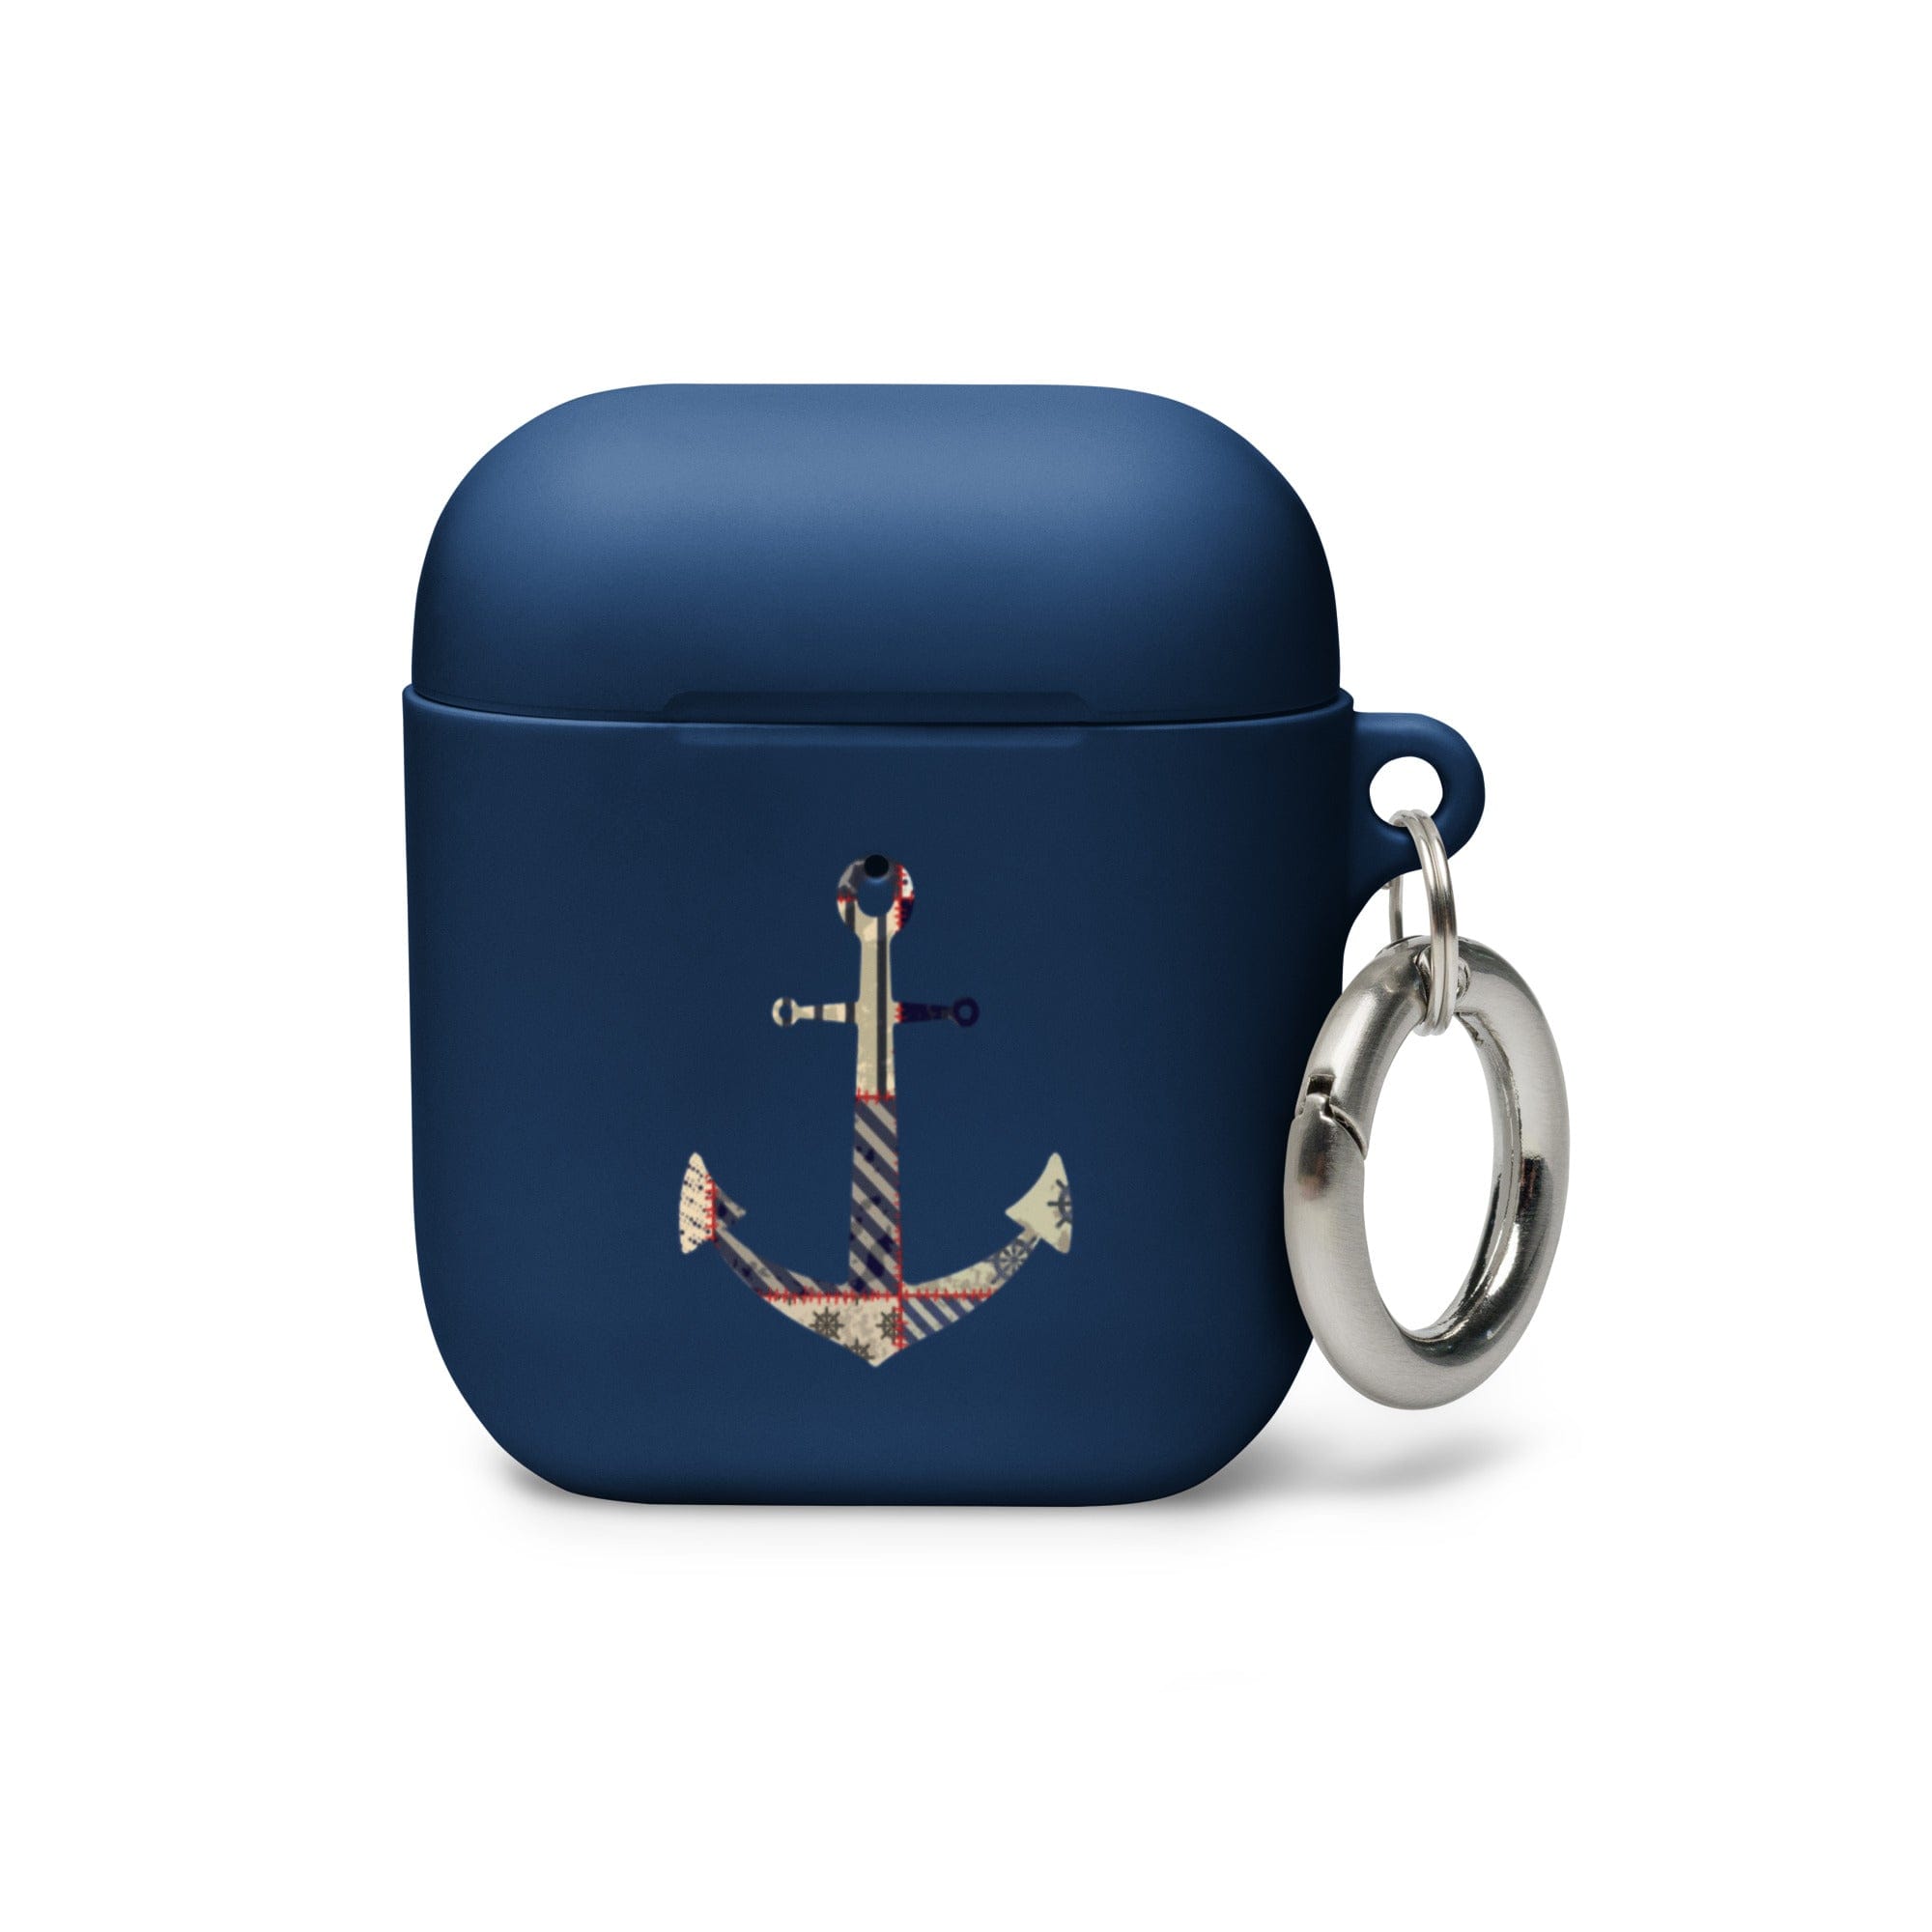 Sailor at heart. From the Marine collection.